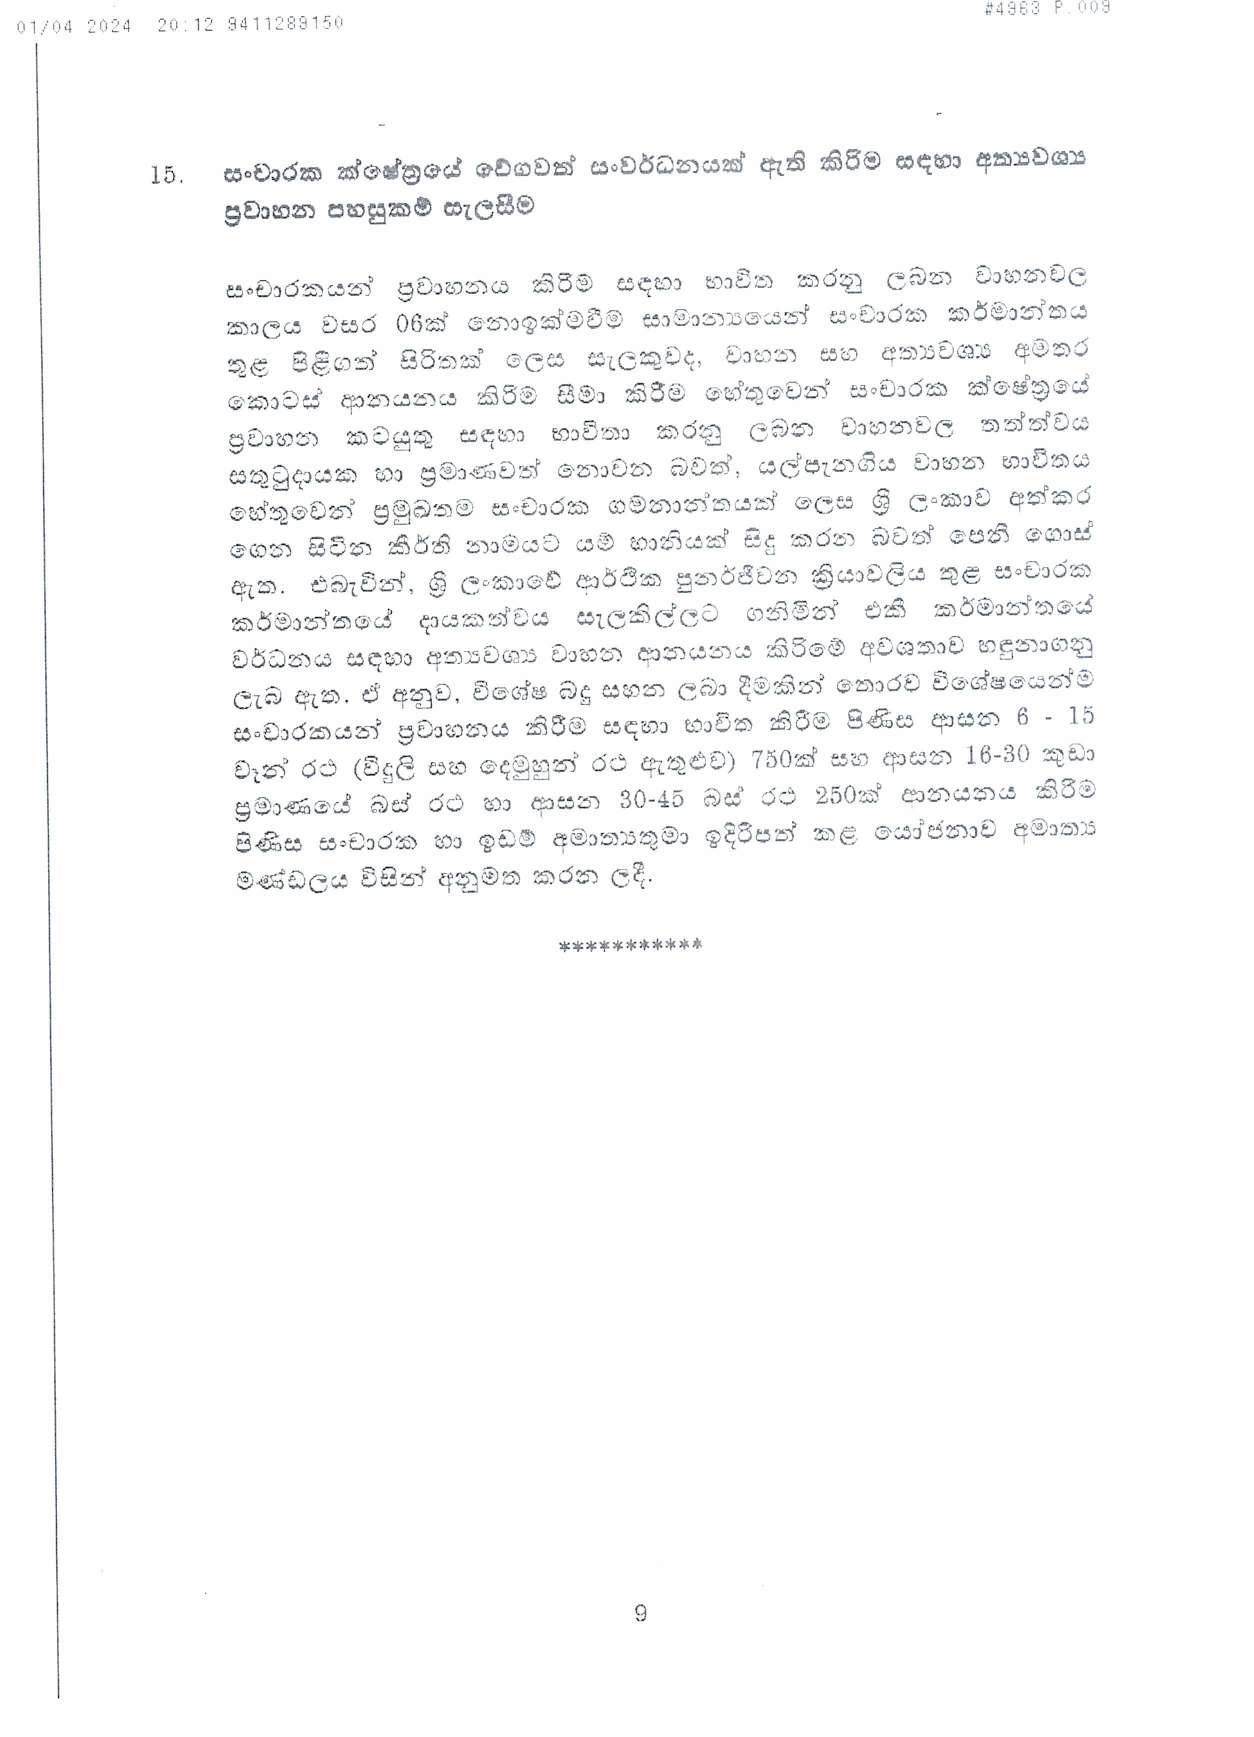 Cabinet Decisions on 01.04.2024 compressed page 009